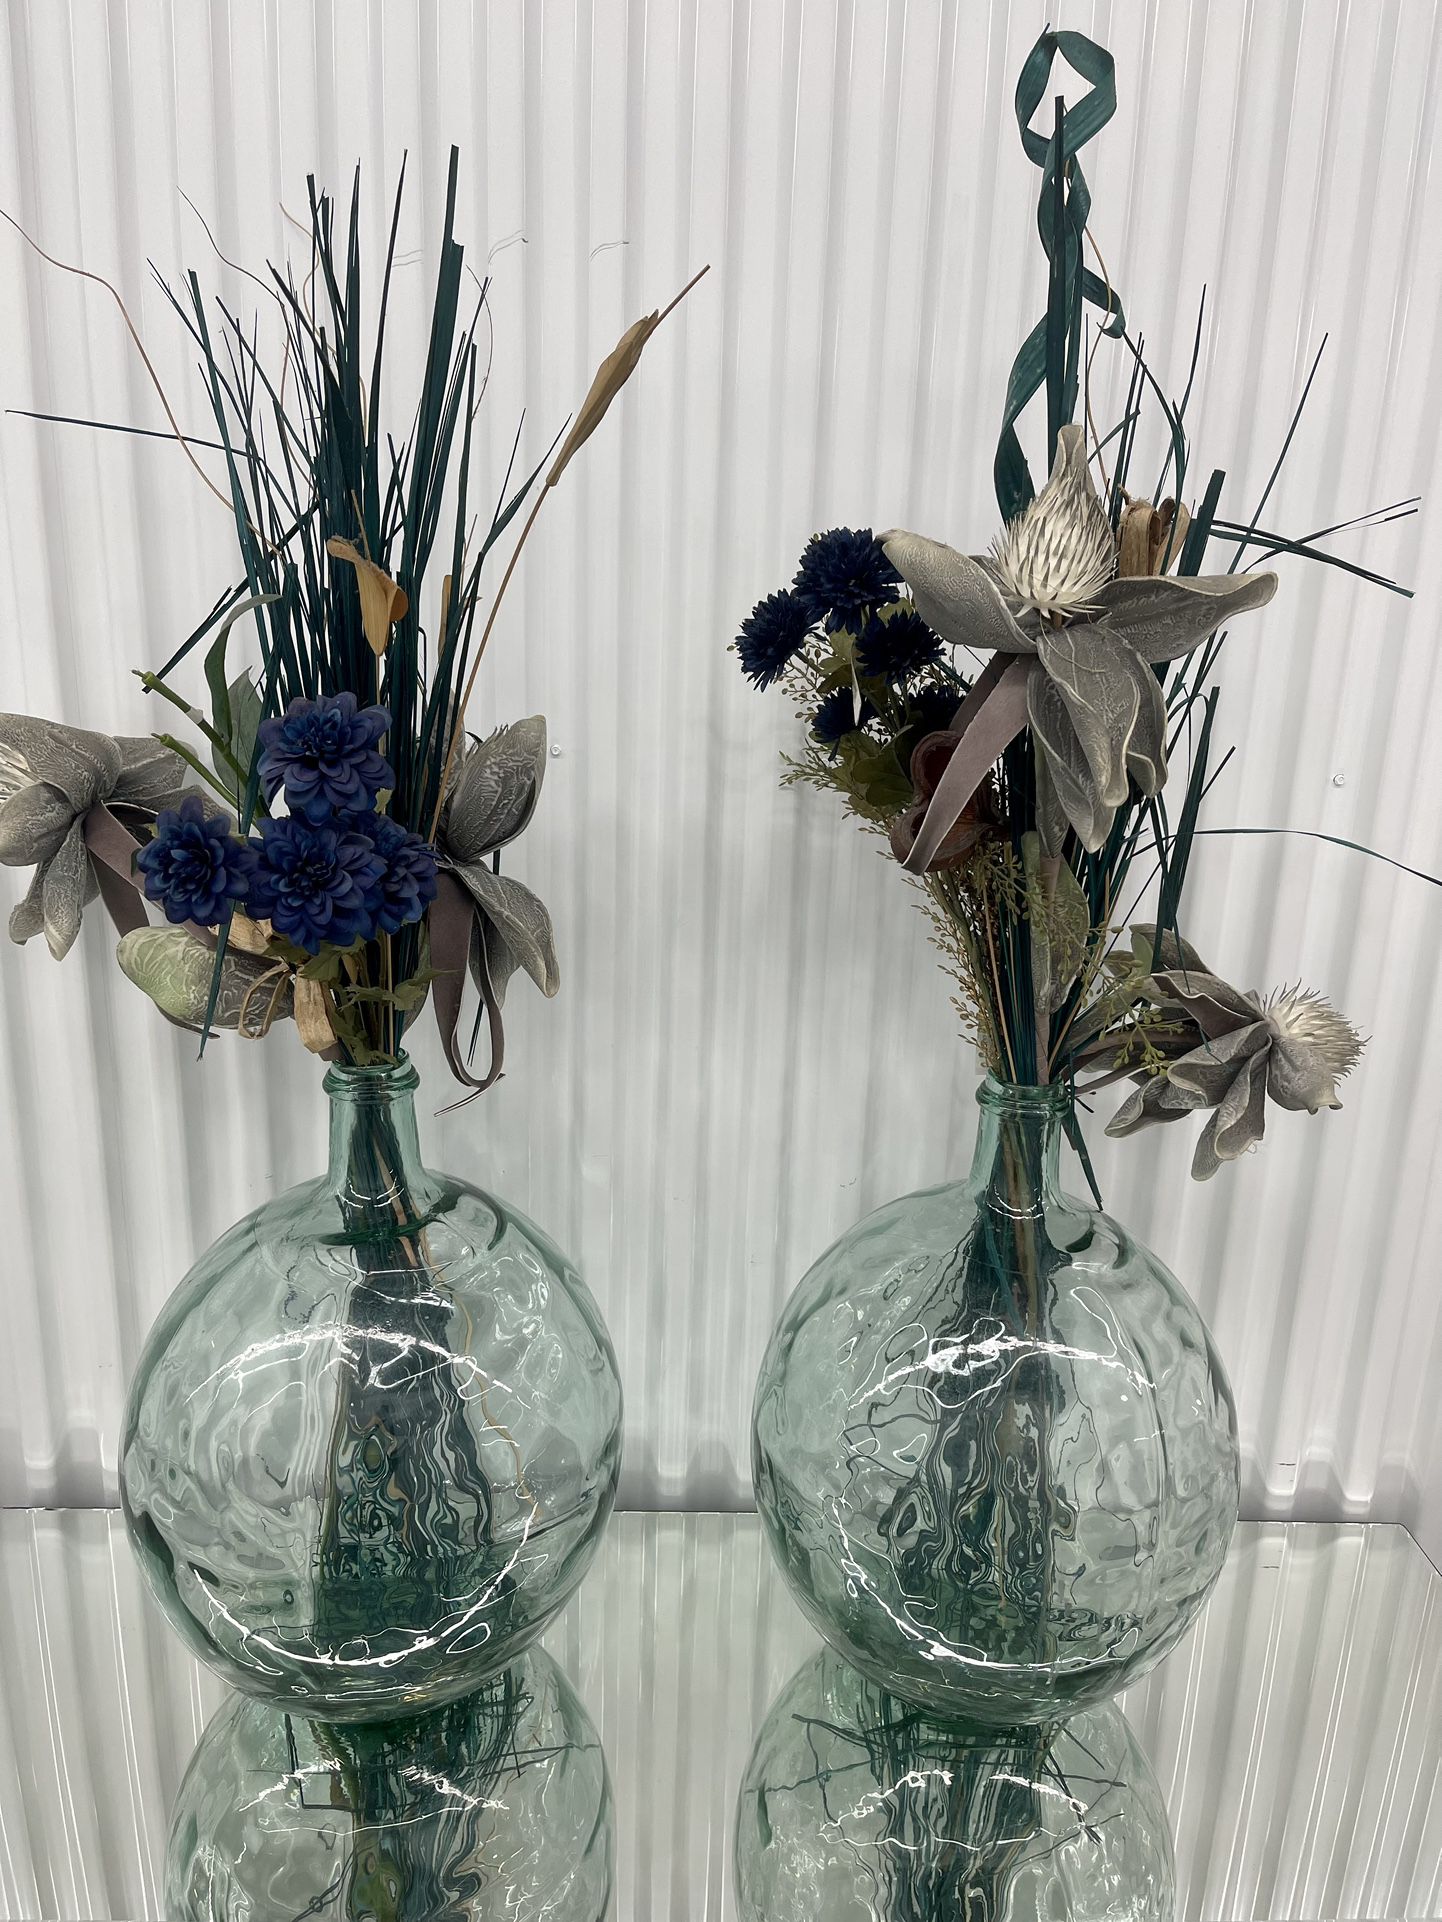 2 large glass vases & dry flowers.